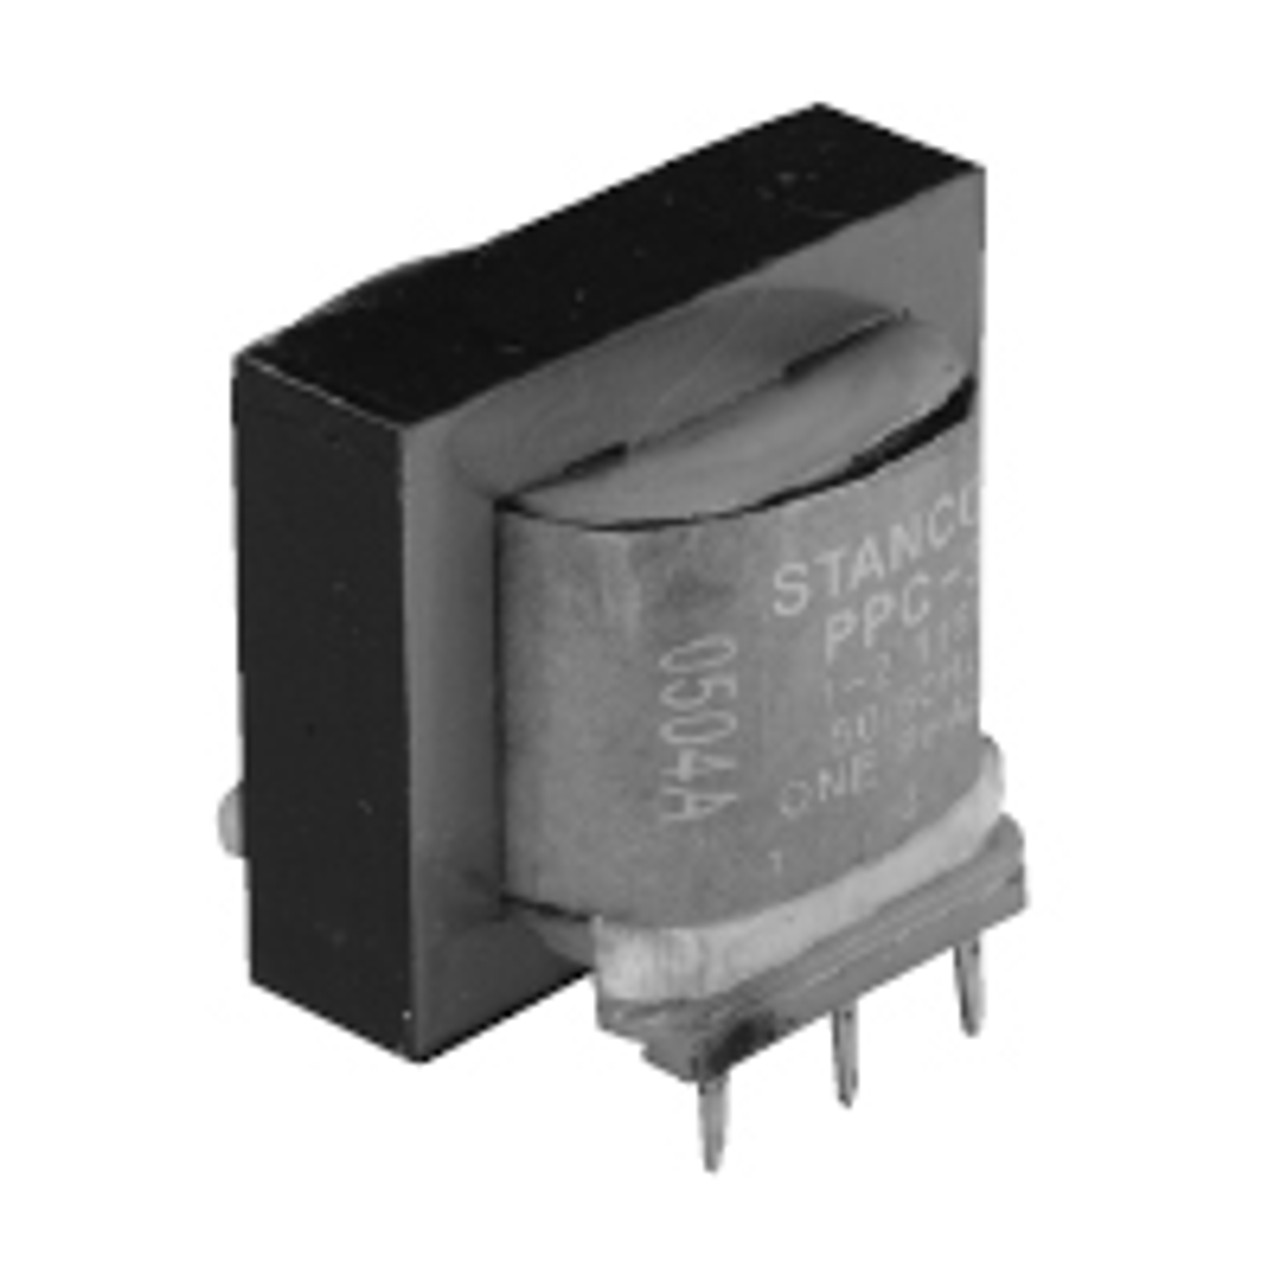 Stancor / White Rodgers PPC-3 Printed Circuit Transformers